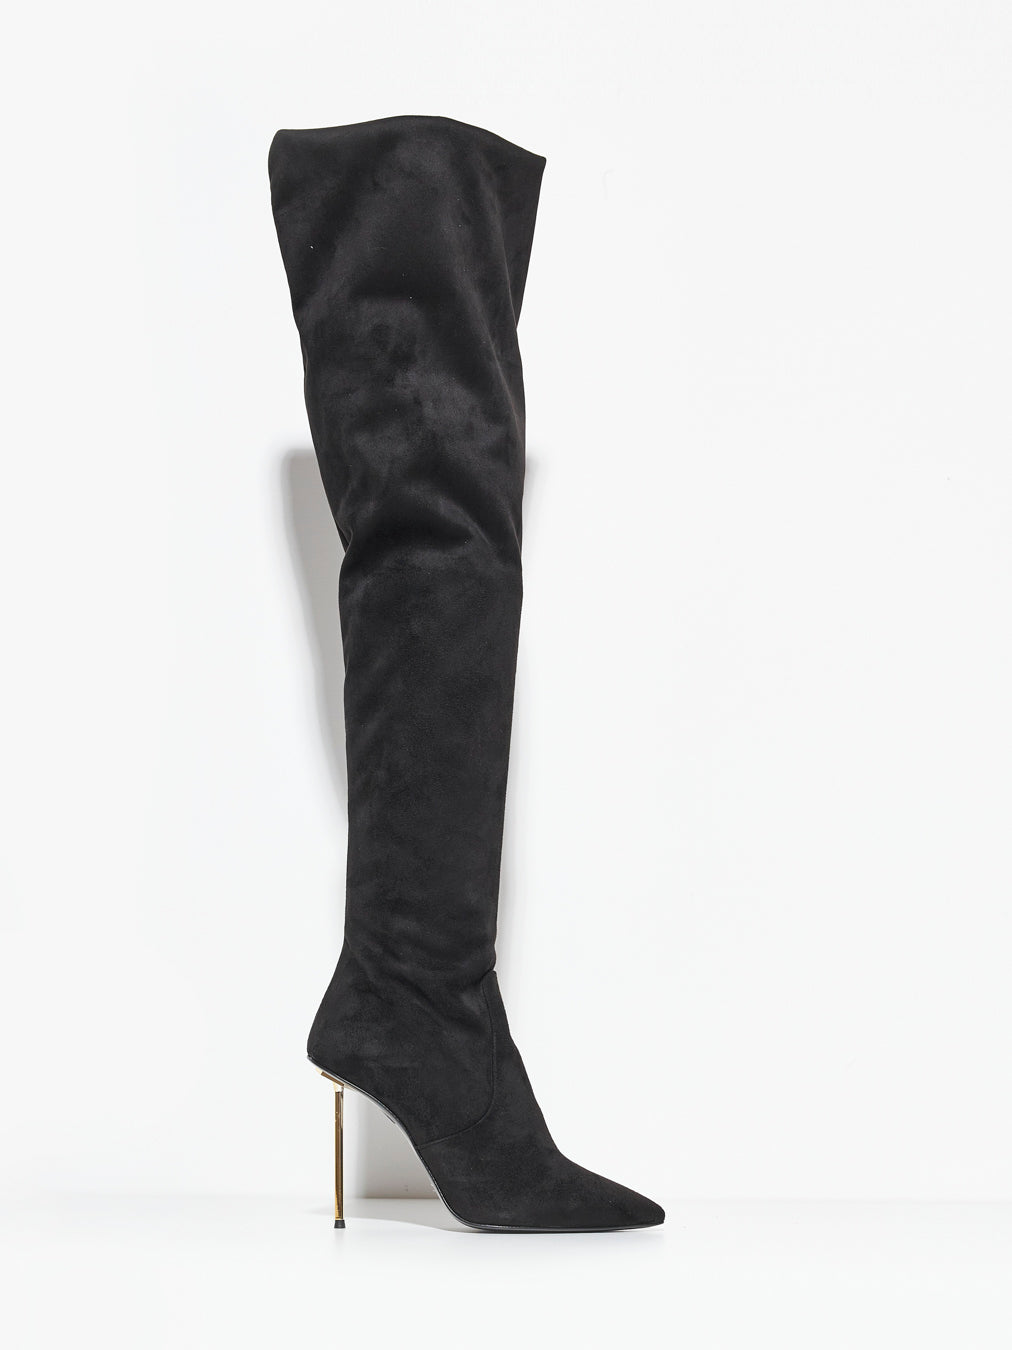 Wo Milano long boot in black leather